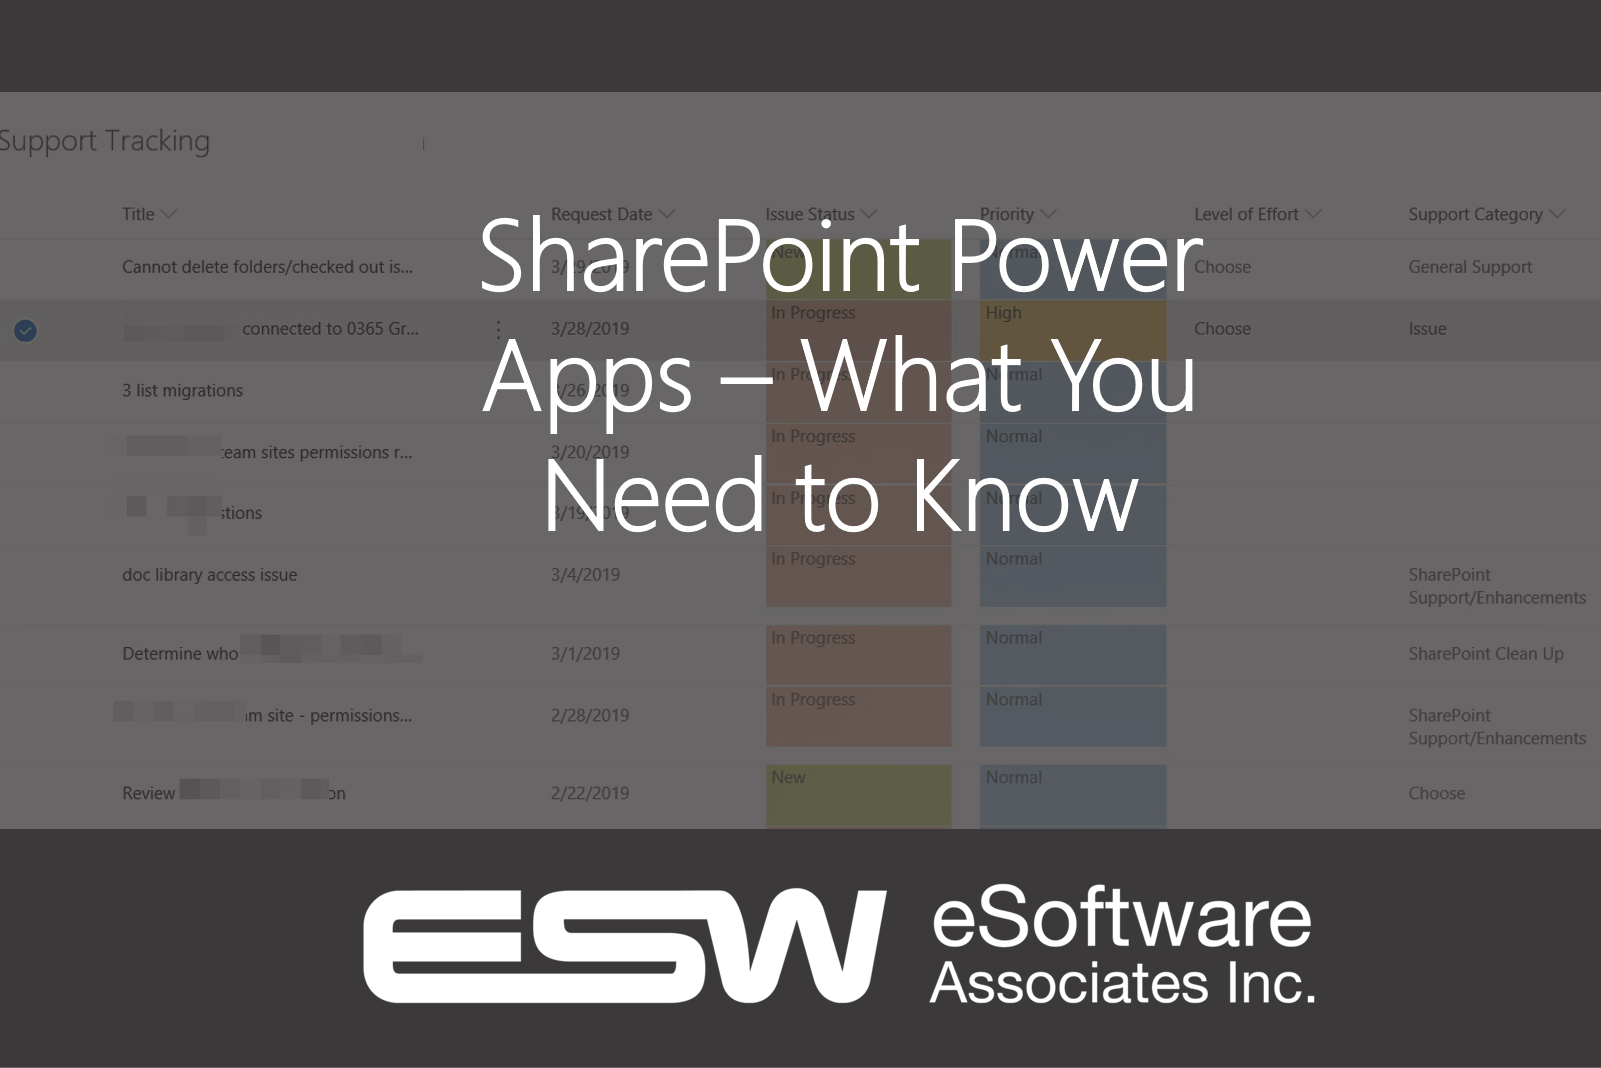 Learn About SharePoint Power Apps and What You Need to Know